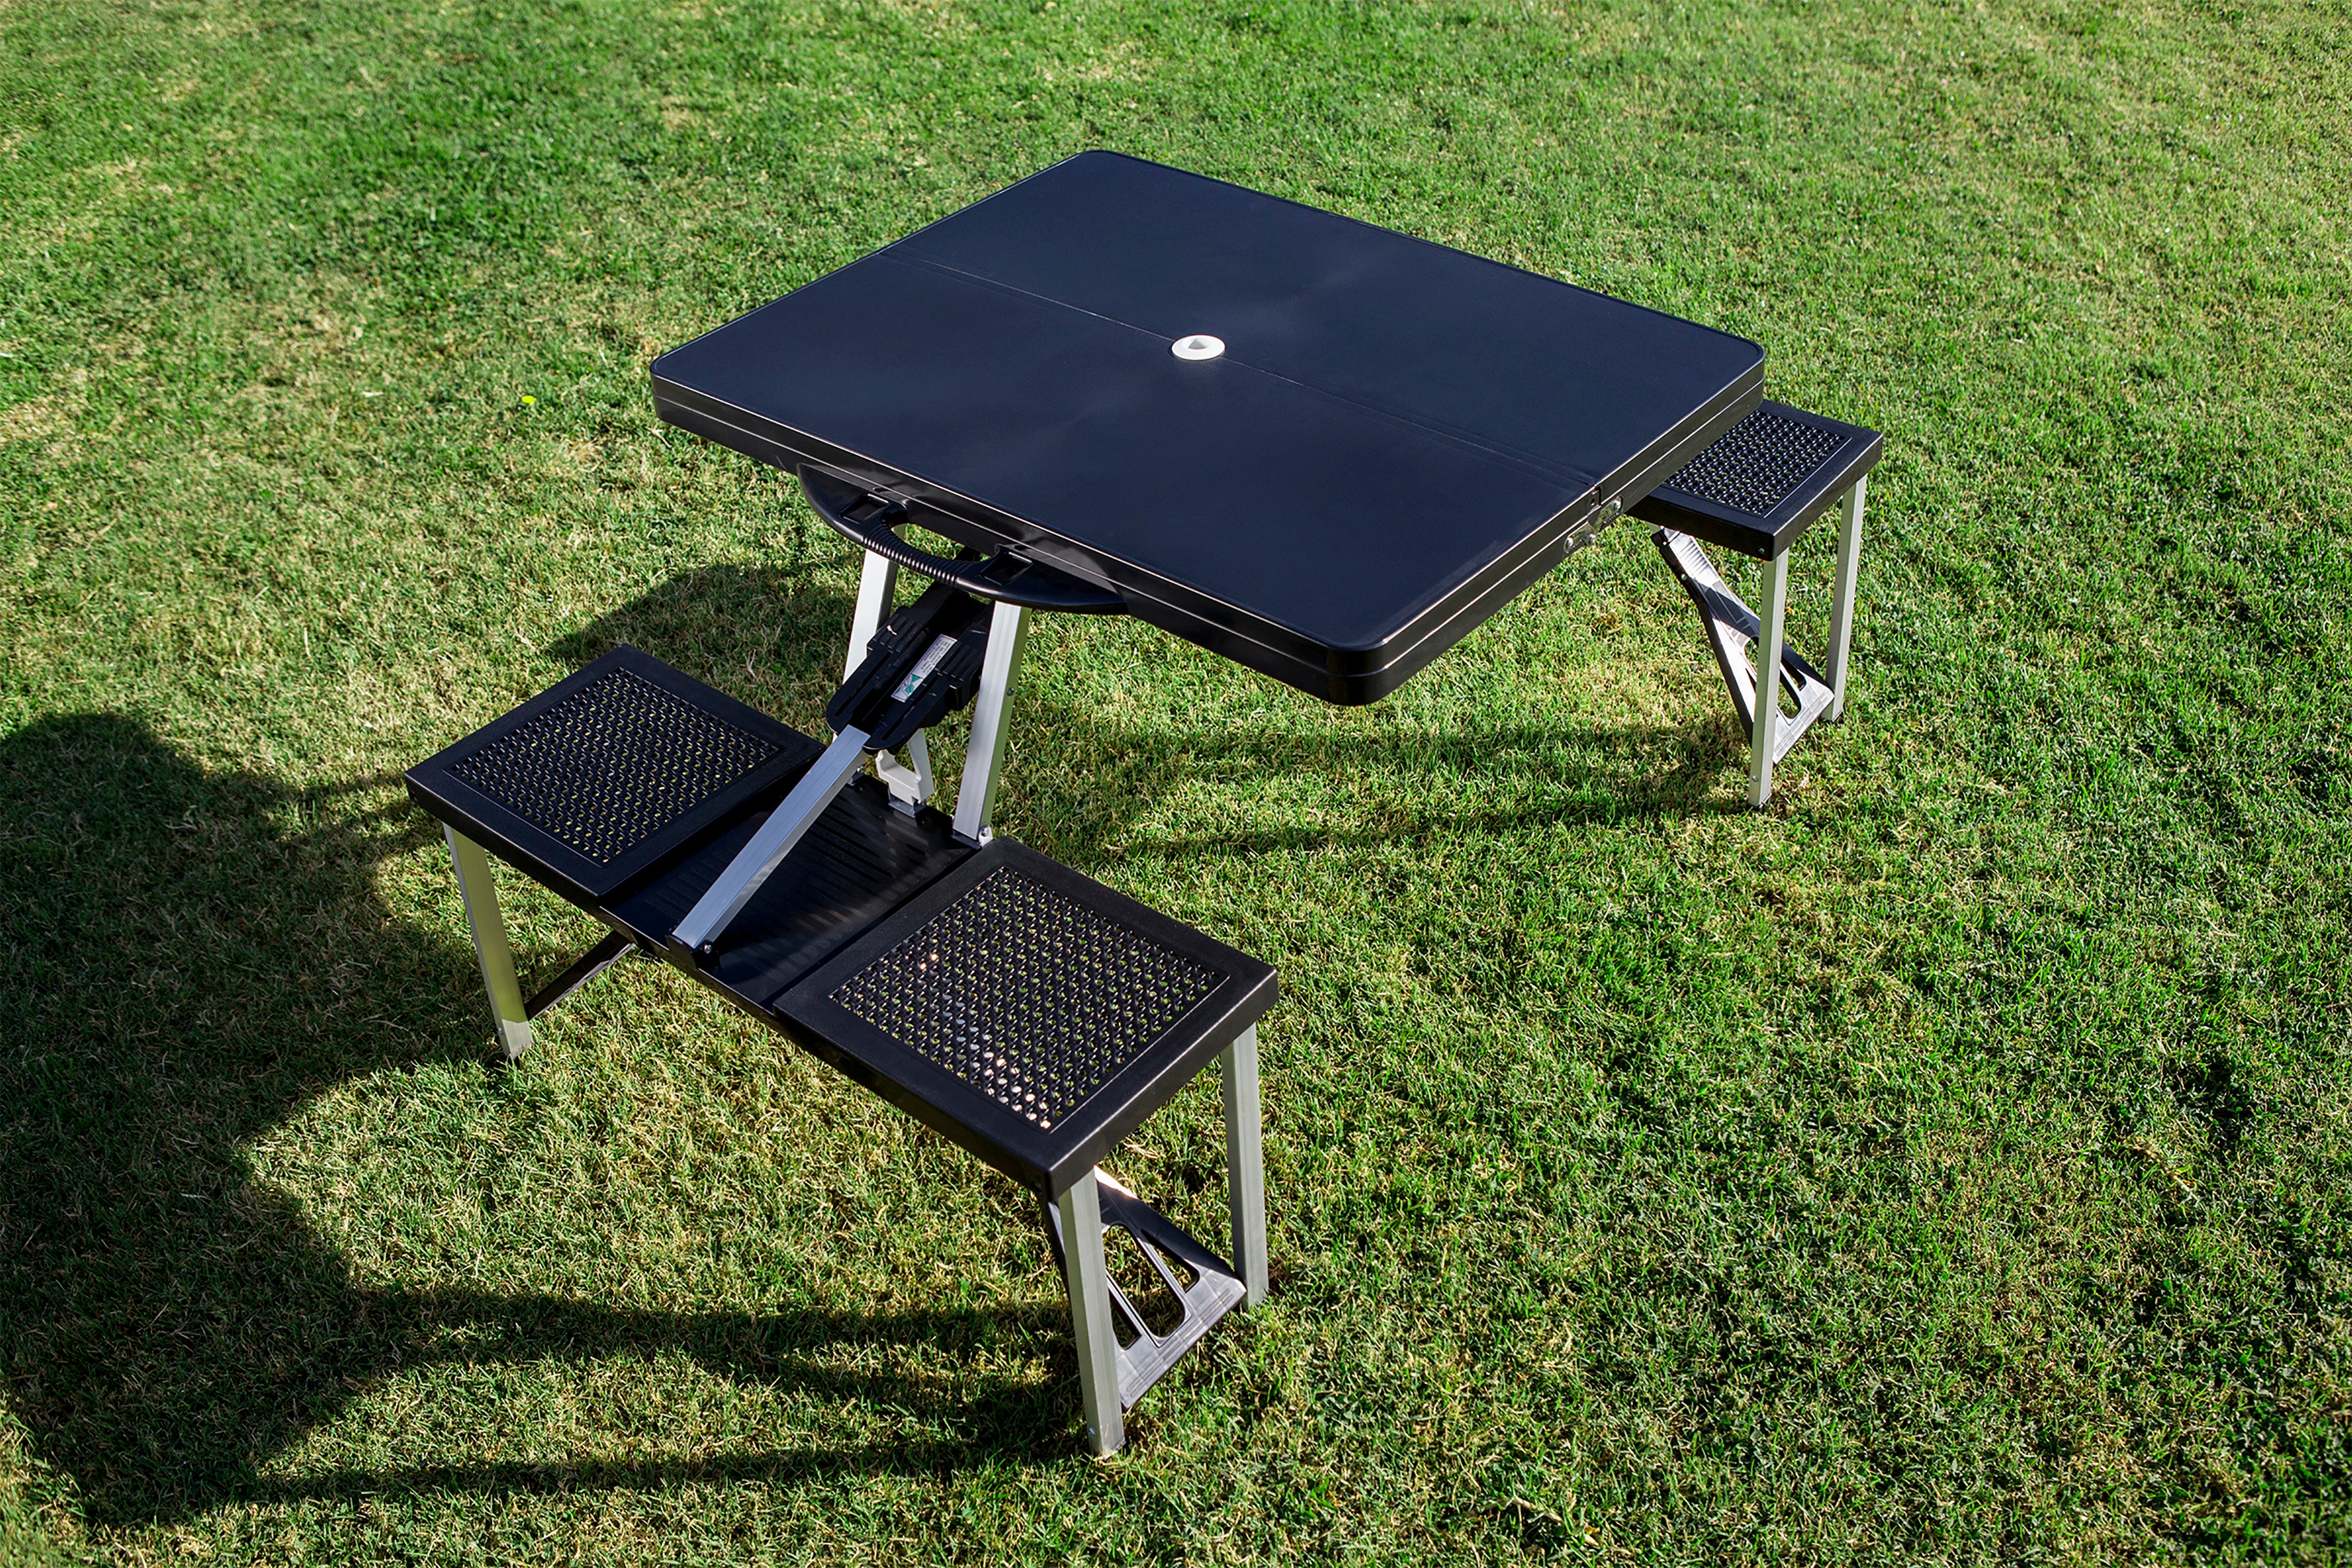 Boston Bruins Hockey Rink - Picnic Table Portable Folding Table with Seats